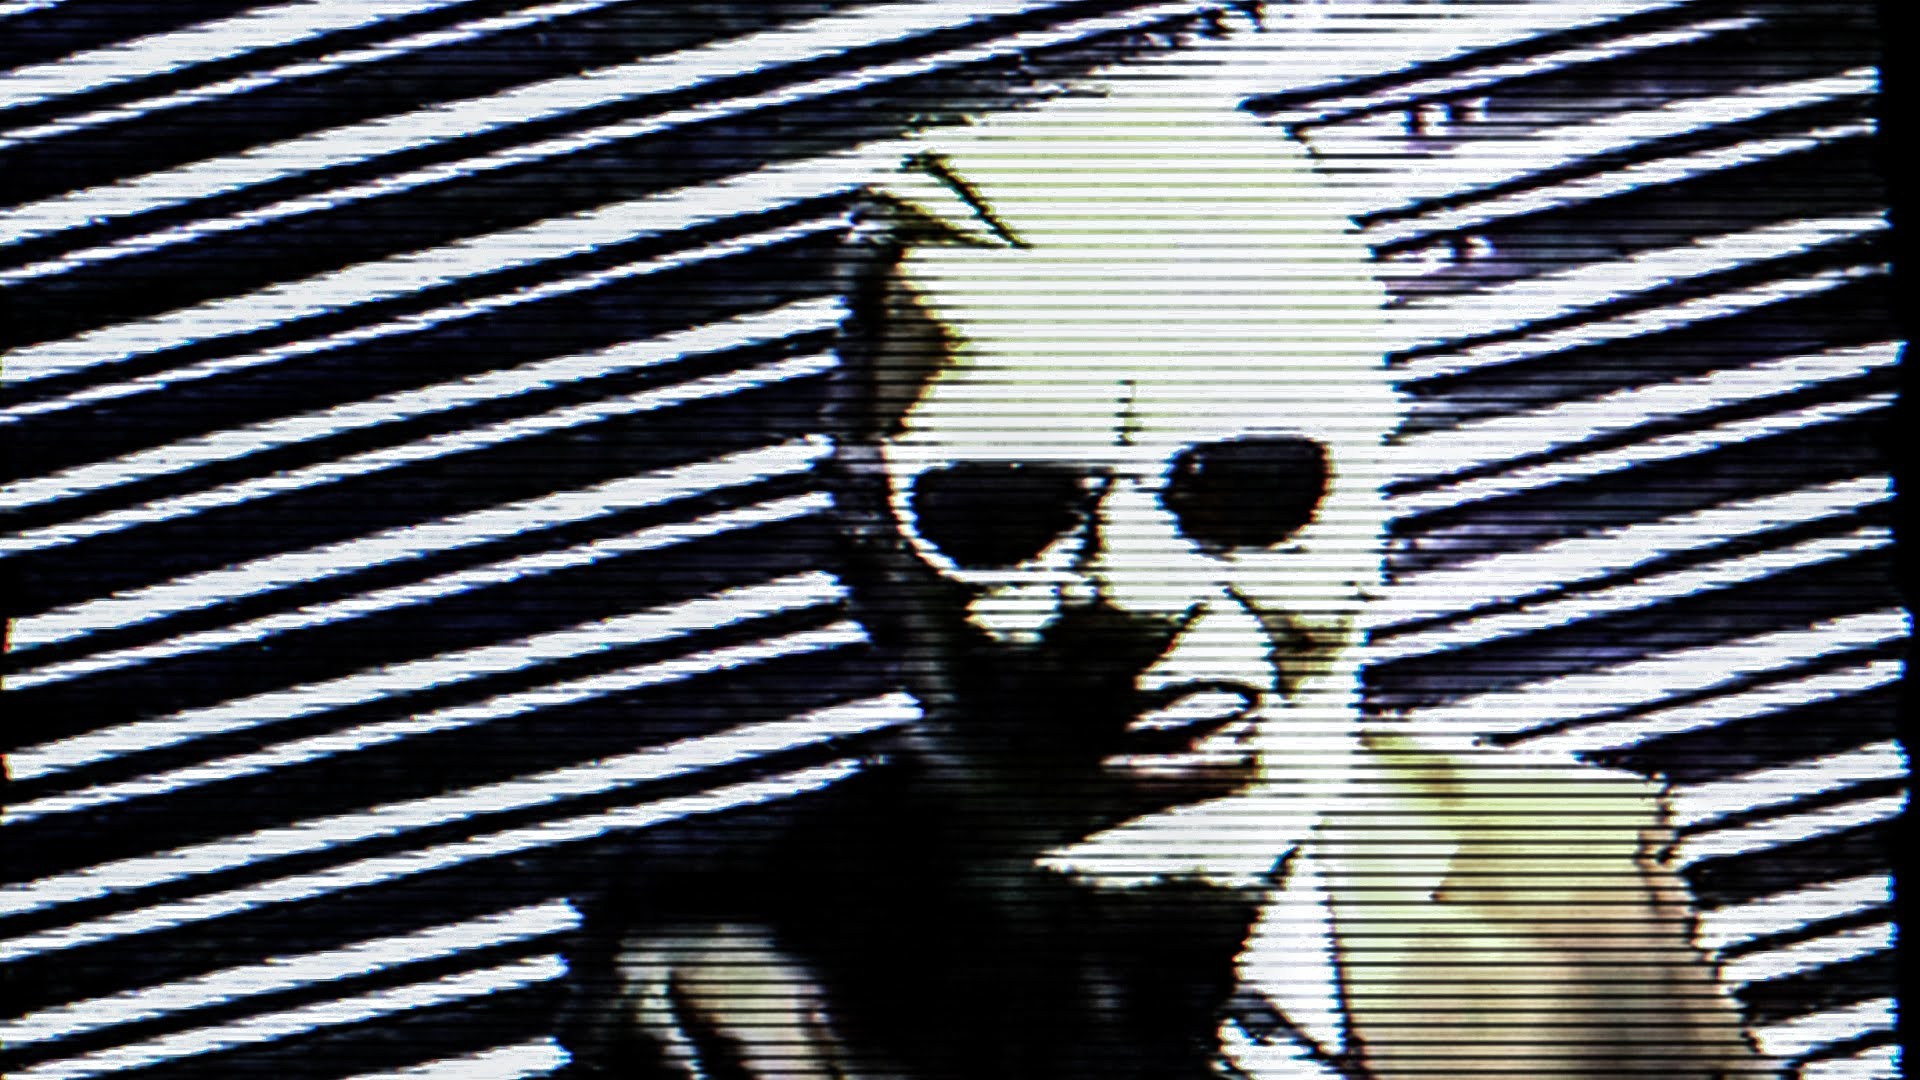 1920x1080 ... Max Headroom, as well as mocking political figures and the networks he  hijacked on November 22, 1987. The broadcast pirate and his accomplices  have ...